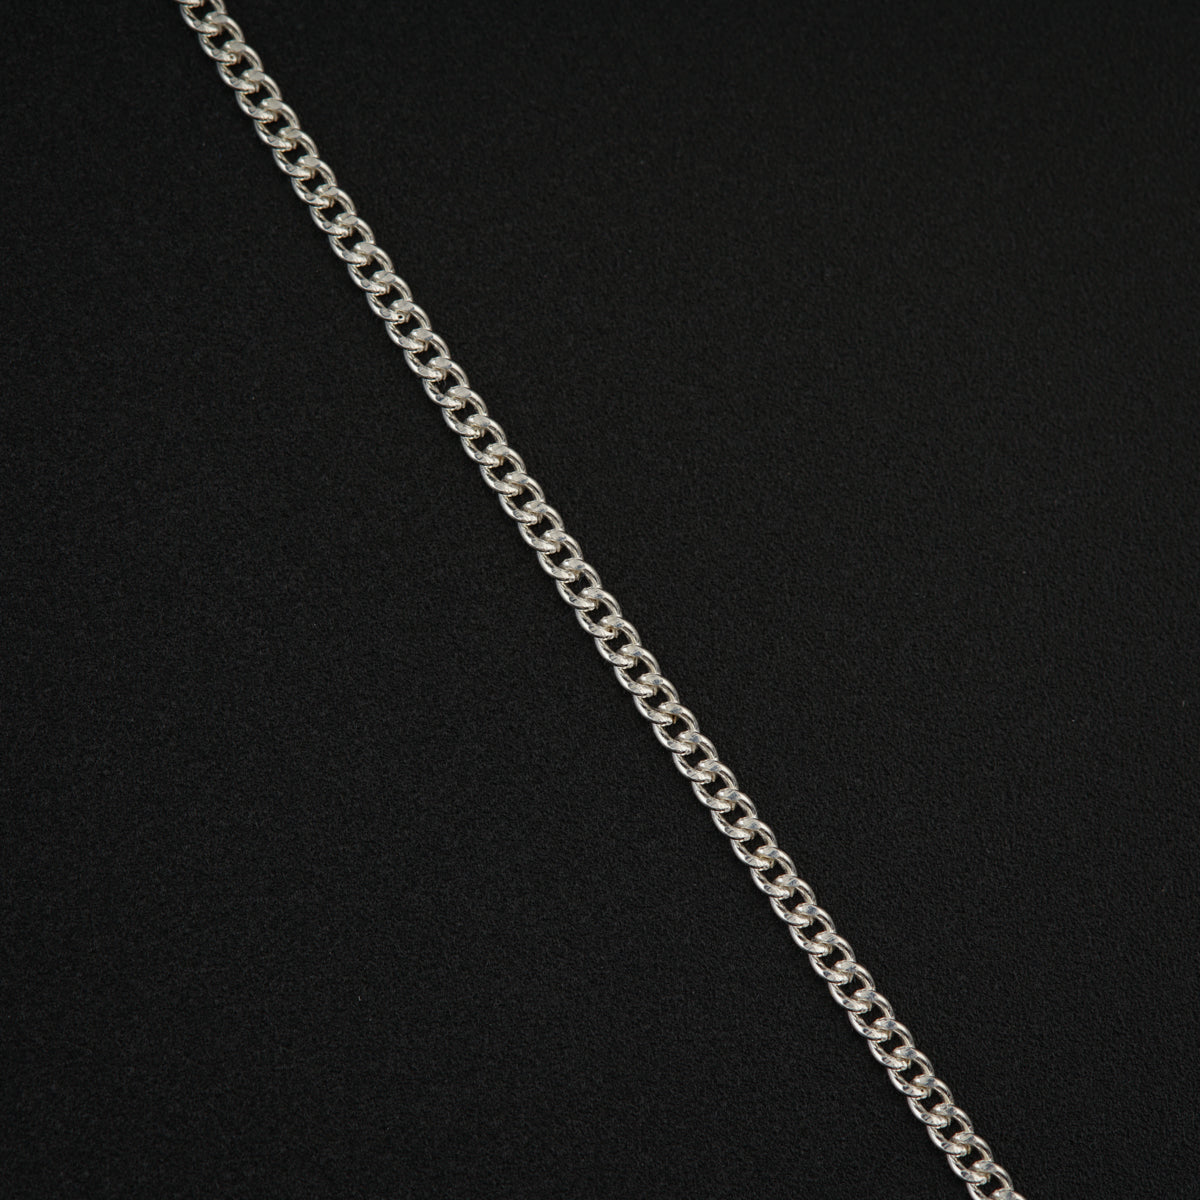 a silver chain with a black background